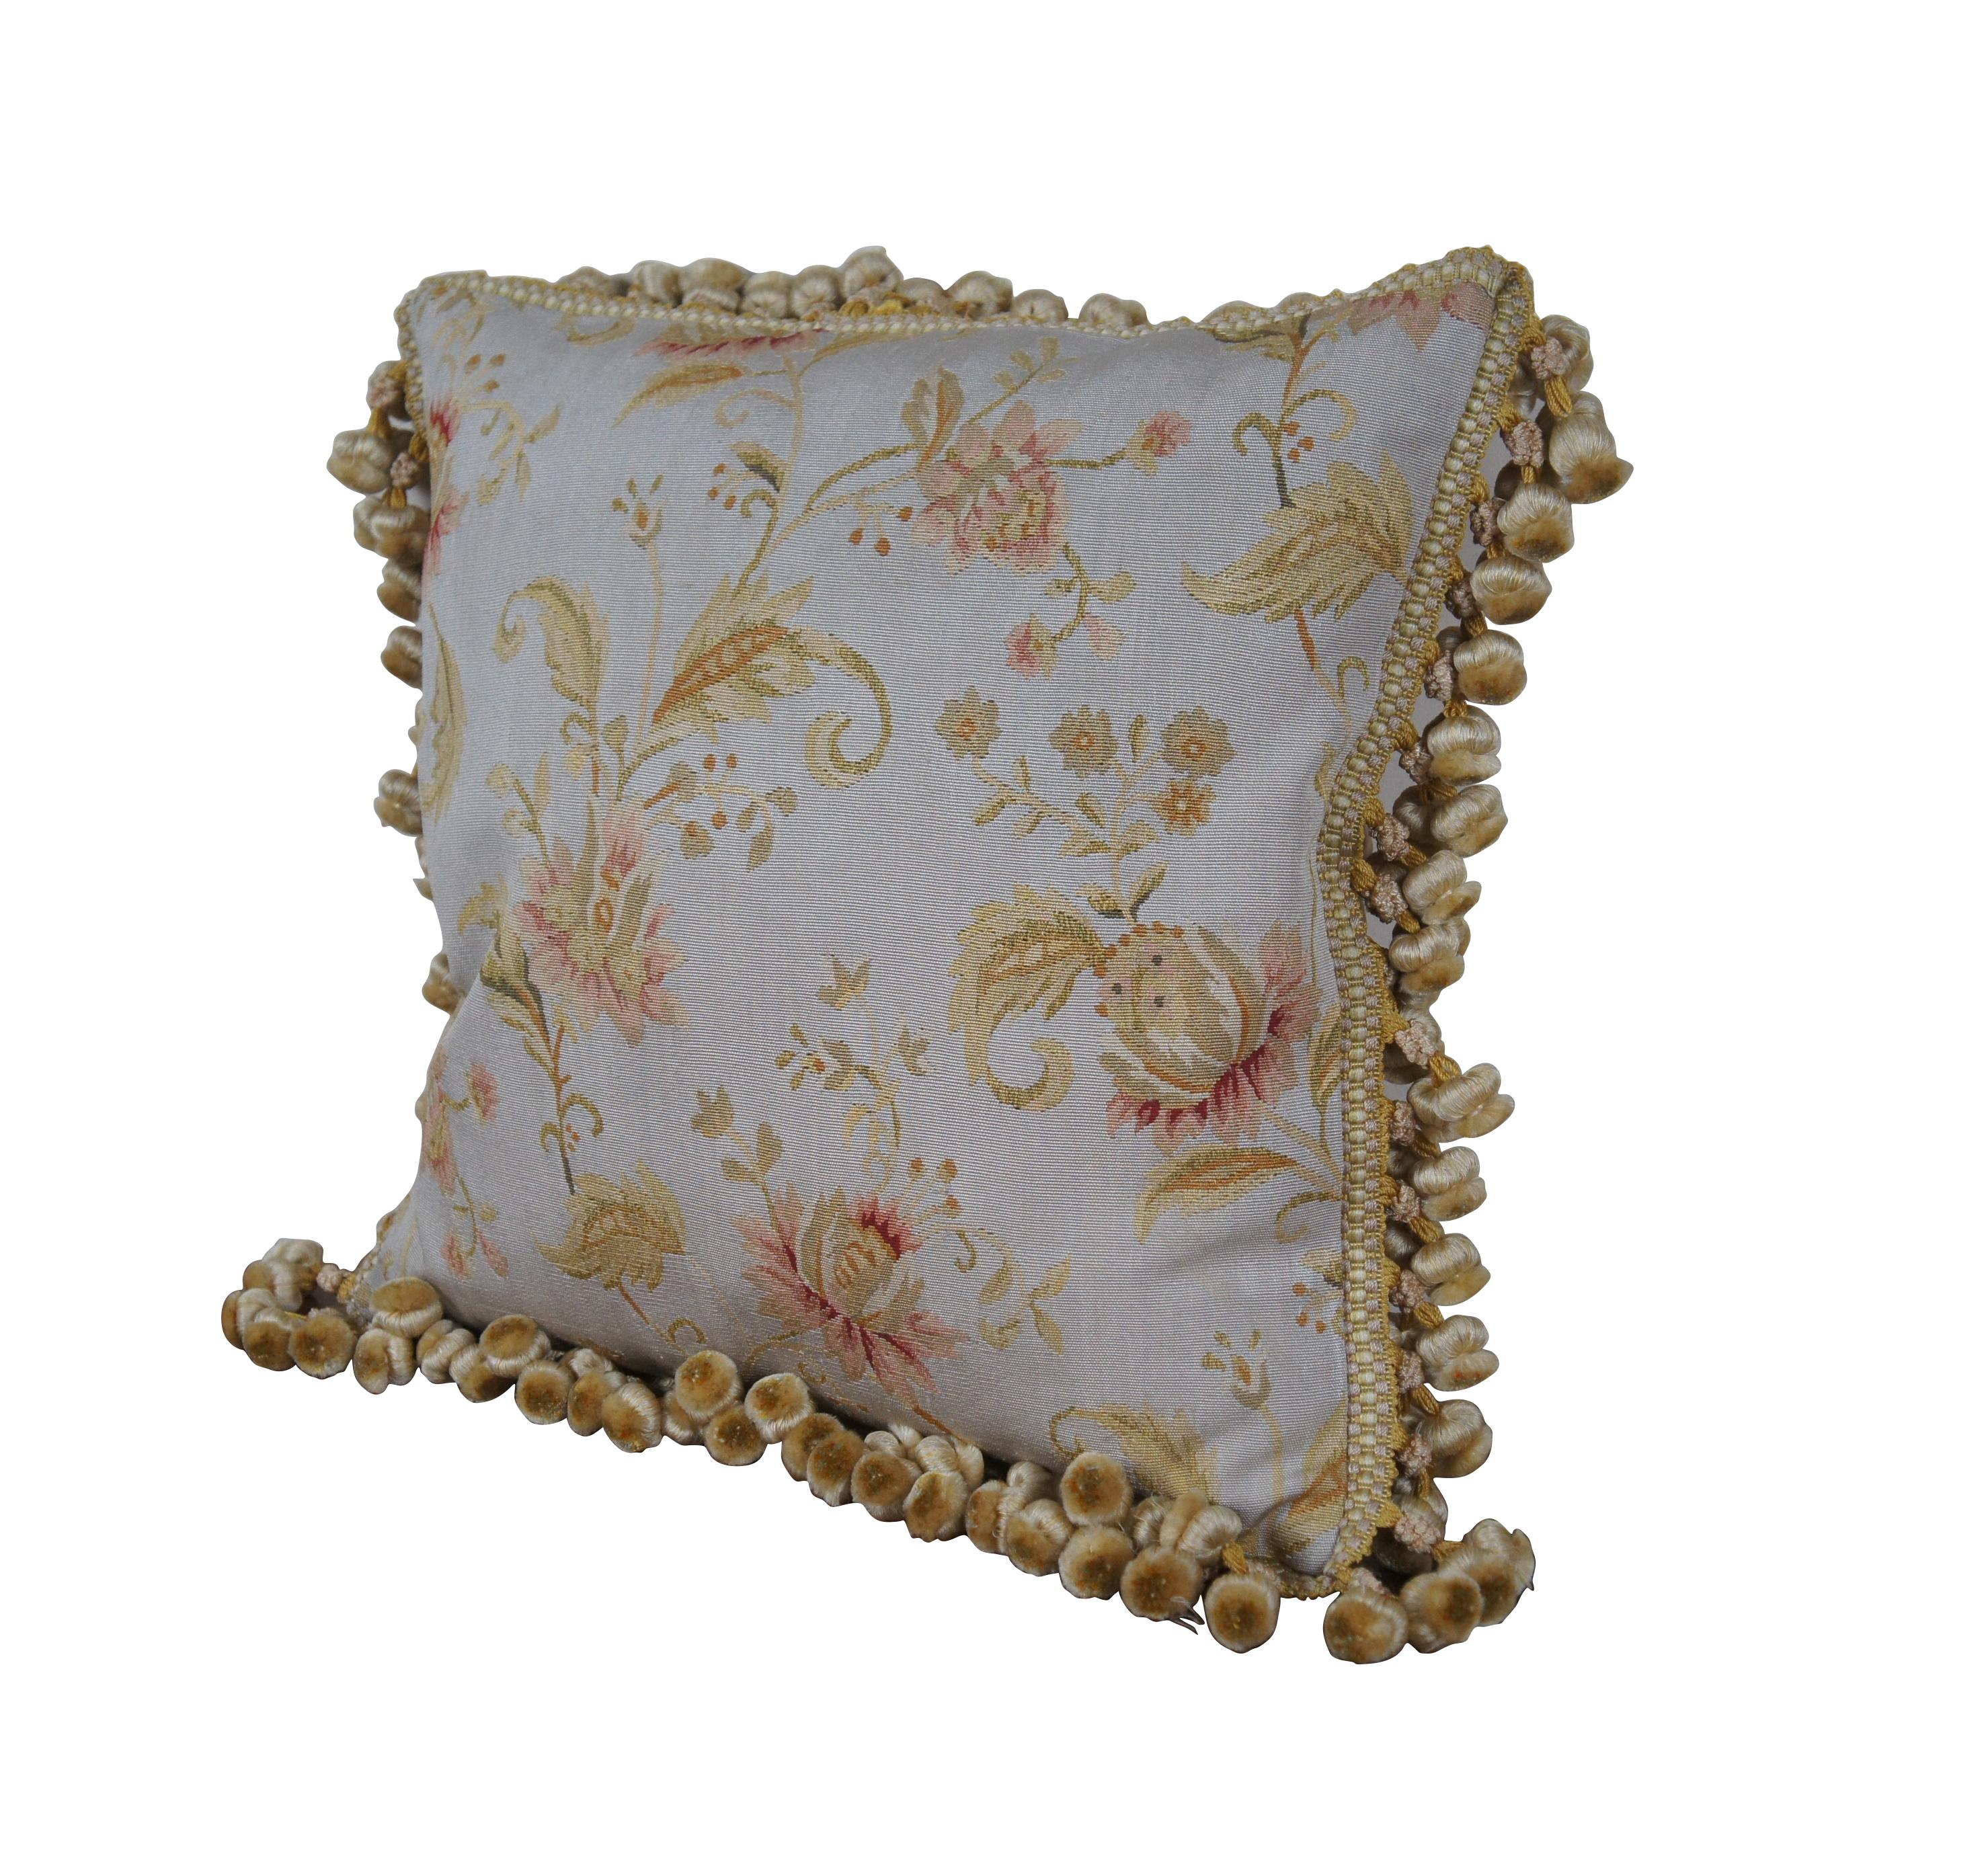 20th century square throw pillow, embroidered in silk with pale green-gold swirling leaves with large, pink lotus blossoms on a pale blue background.  Gold and cream ball tassel trim. Light brown velour back with zipper closure. Down filled. Made in